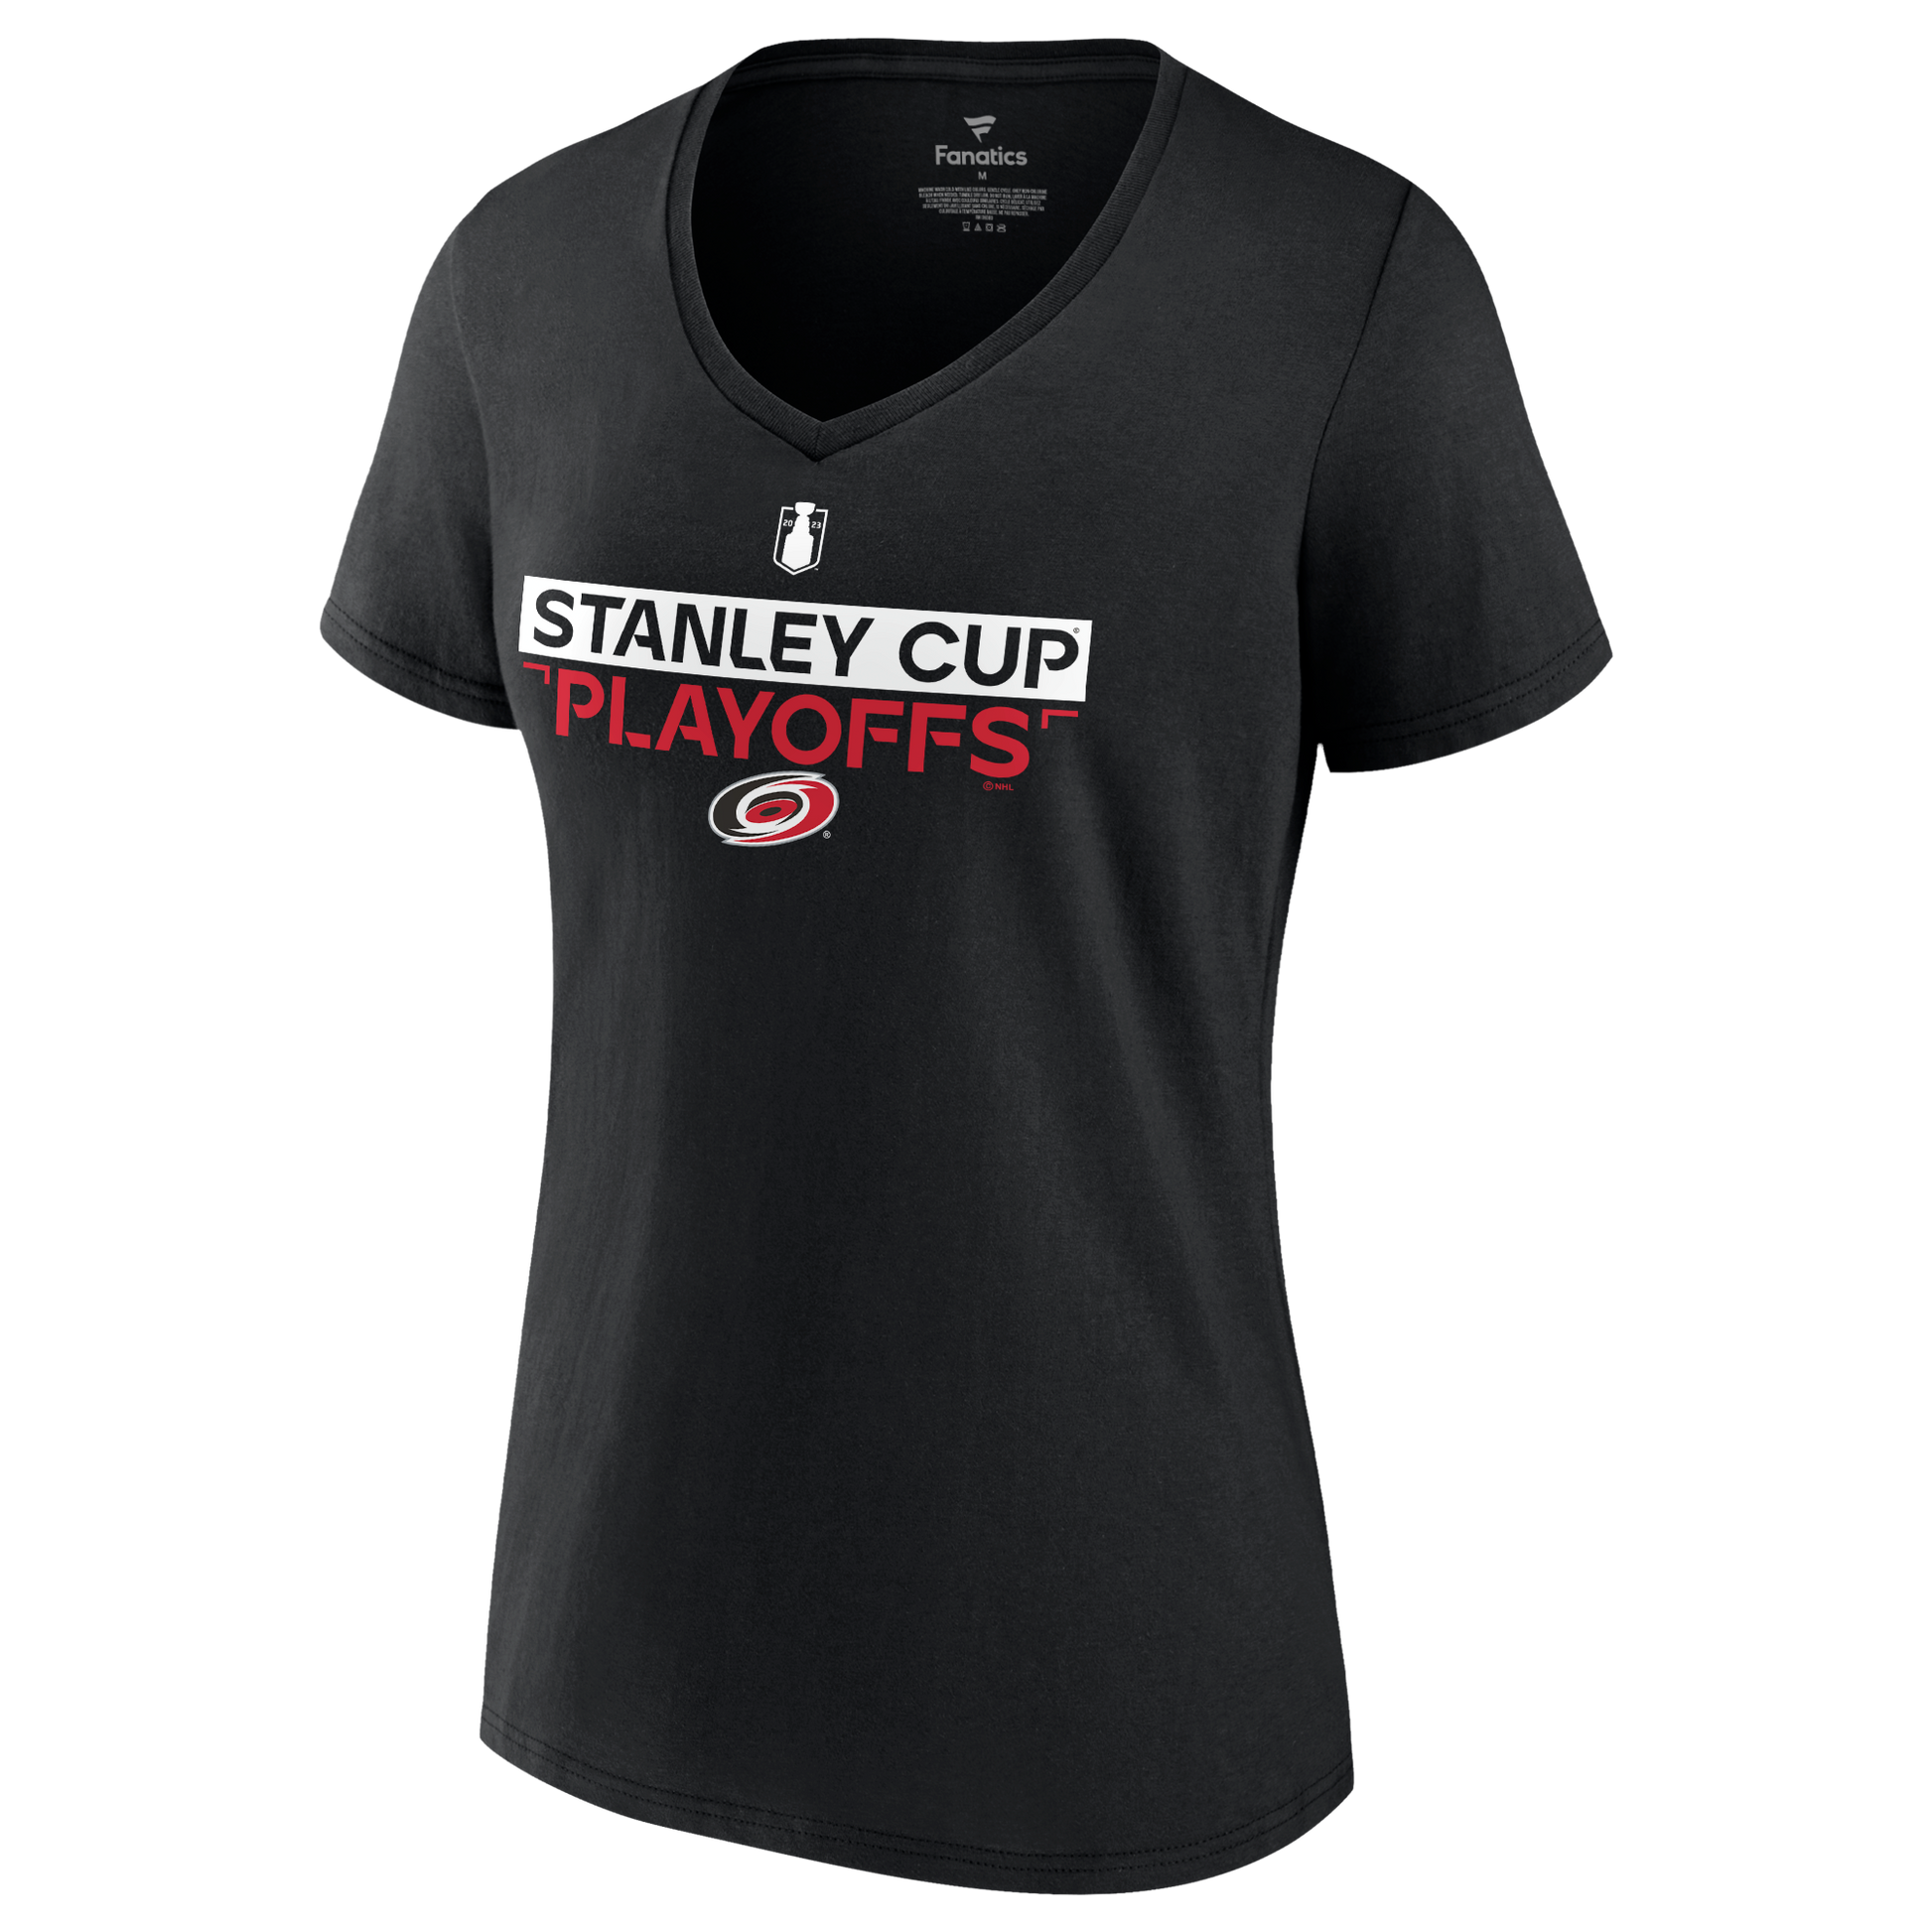 V-Neck tee that says Stanley Cup Playoffs in Red black white with Hurricanes logo